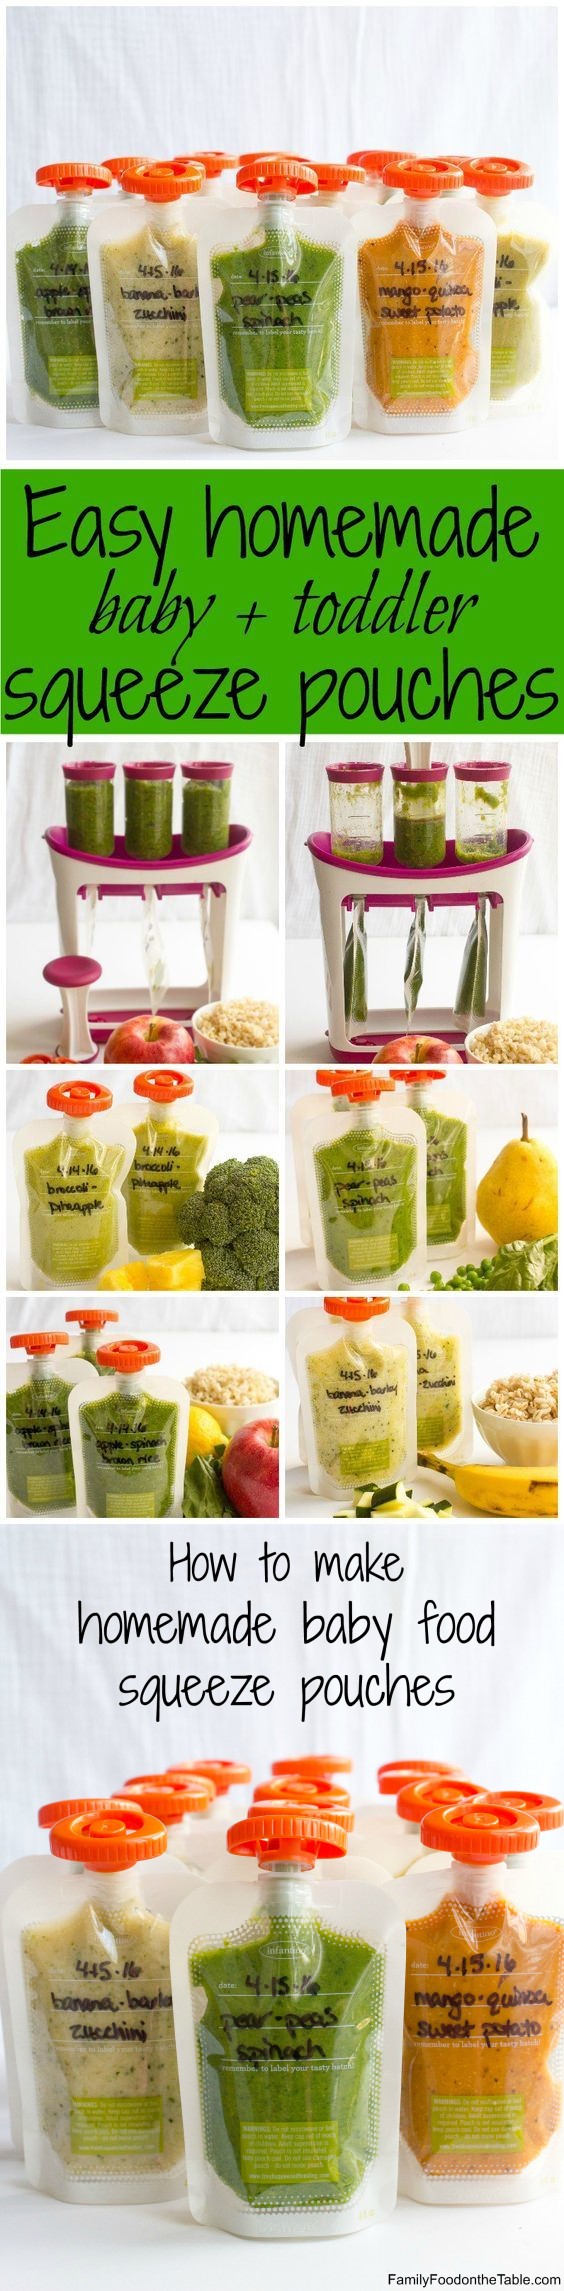 Homemade baby food pouches